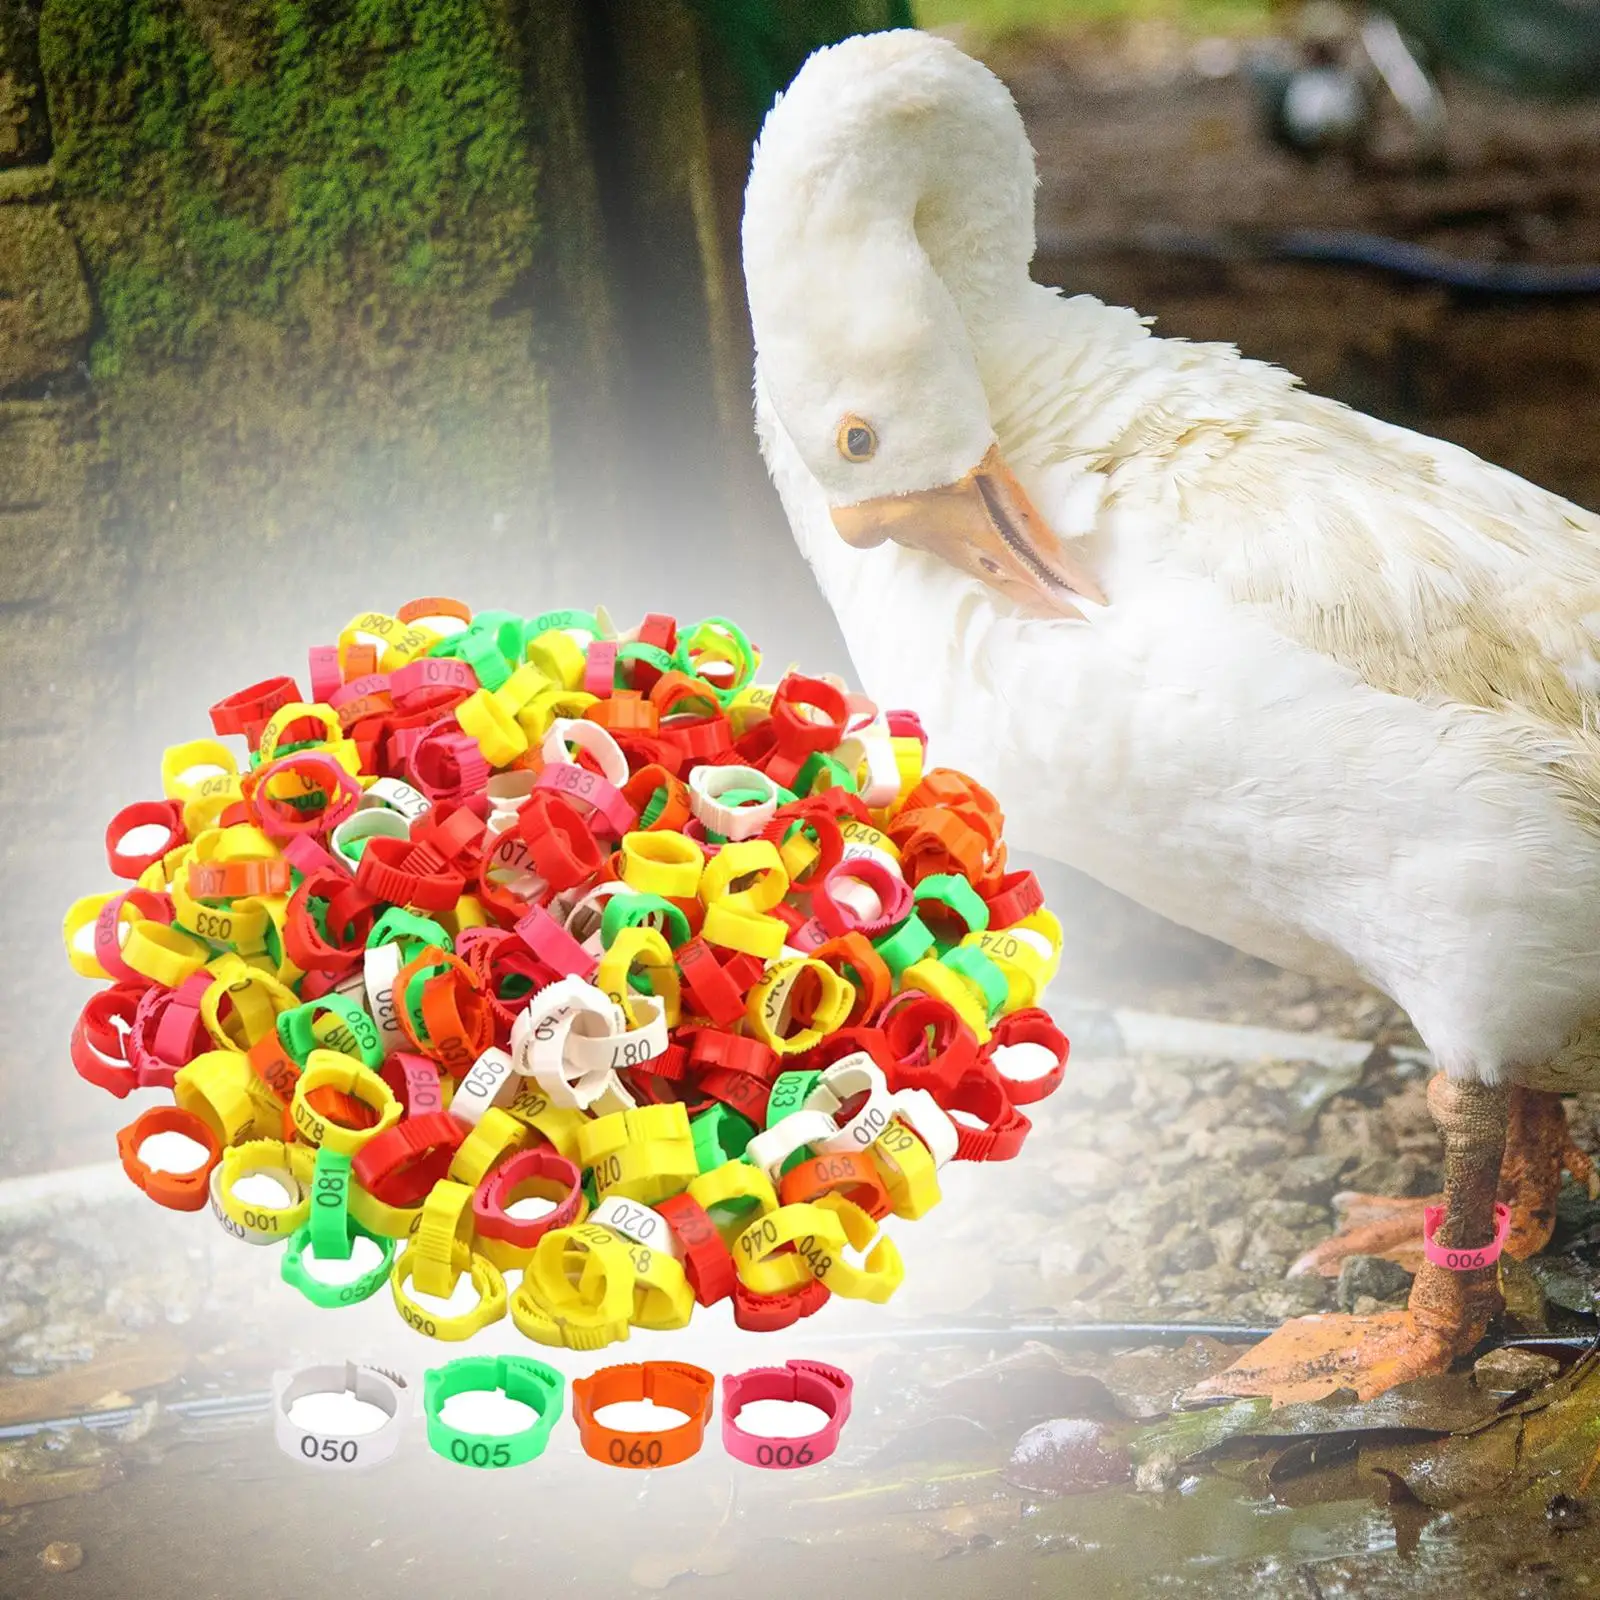 100x Poultry Foot Bands Adjustable Buckle Clip Ring Foot Label Rings Chicken Leg Rings for Chickens Ducks Pigeon Goose Bantam